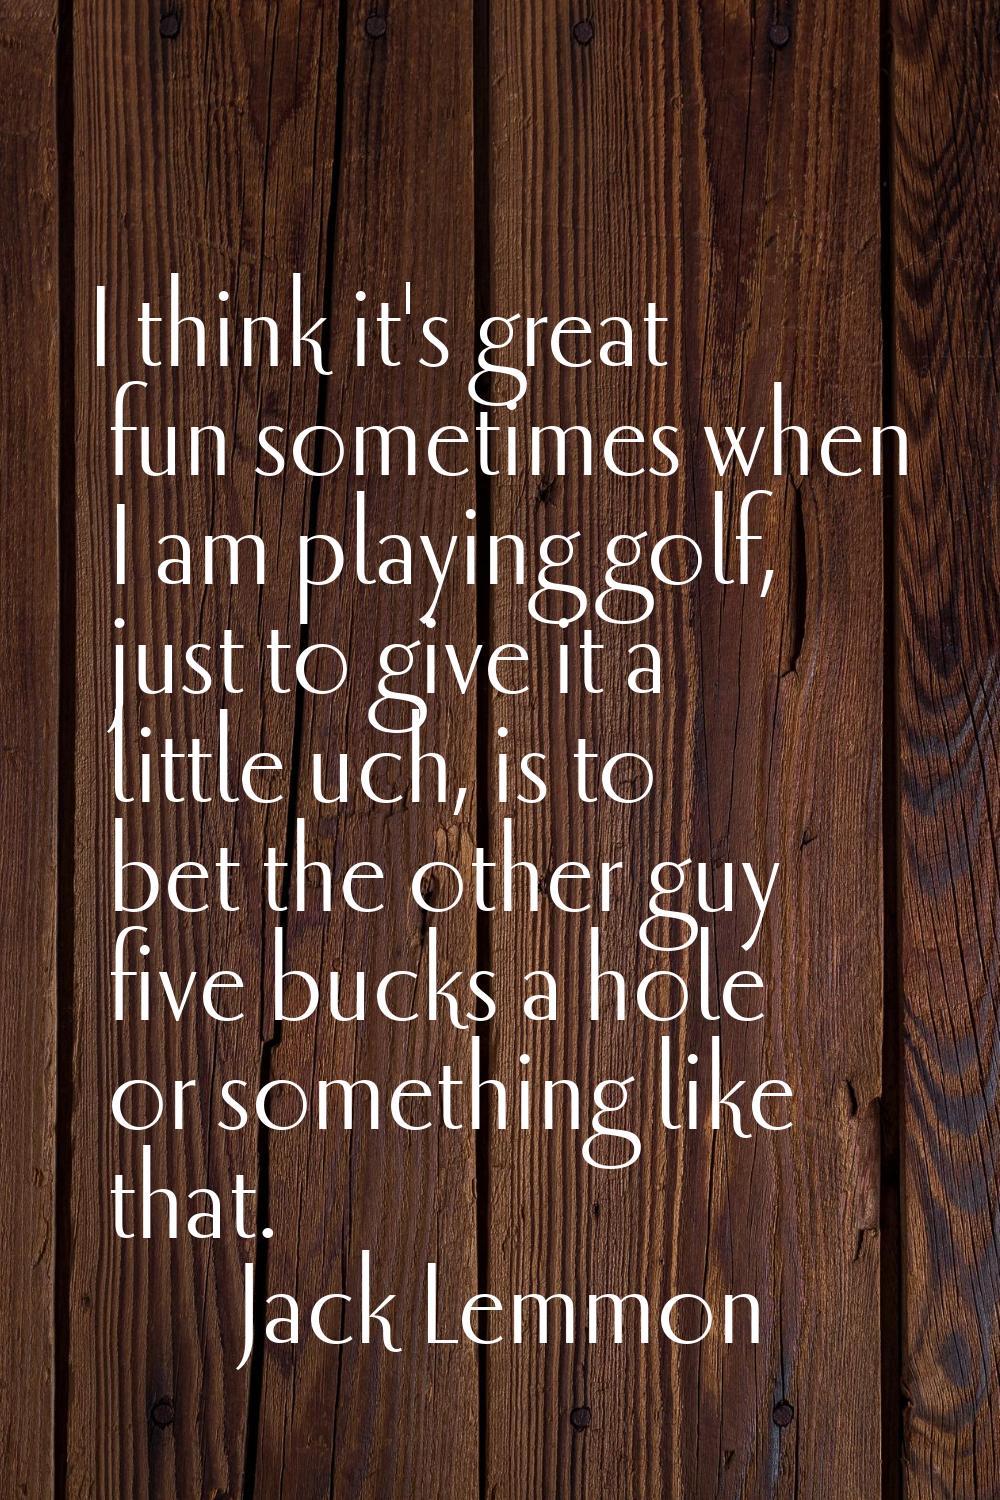 I think it's great fun sometimes when I am playing golf, just to give it a little uch, is to bet th